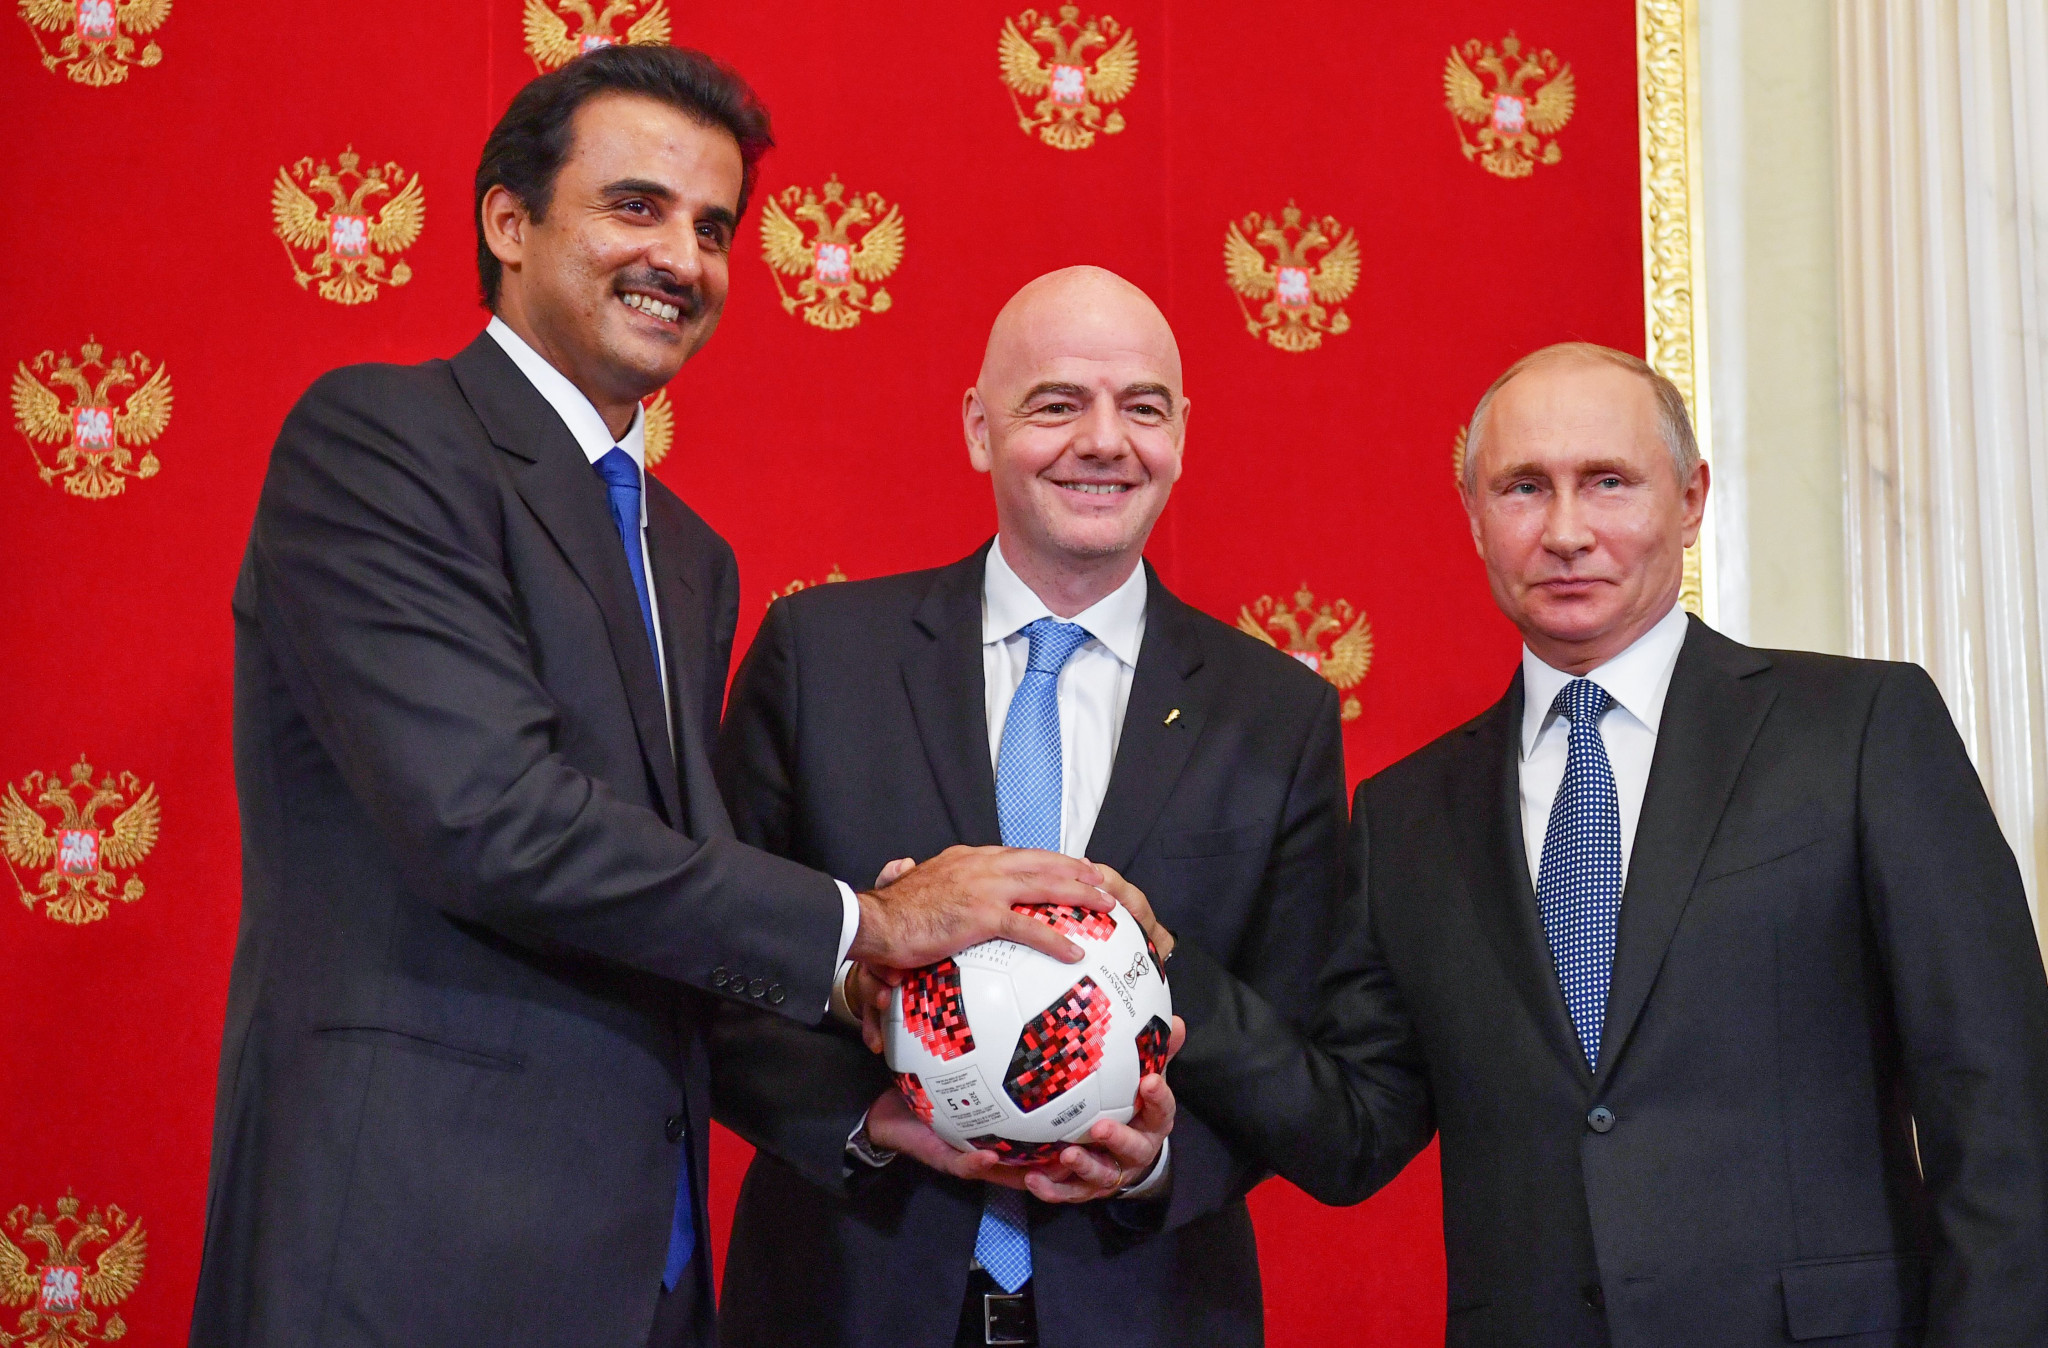 Qatar 2022 claim they are "embracing the pressure" after being passed FIFA World Cup baton by Russia